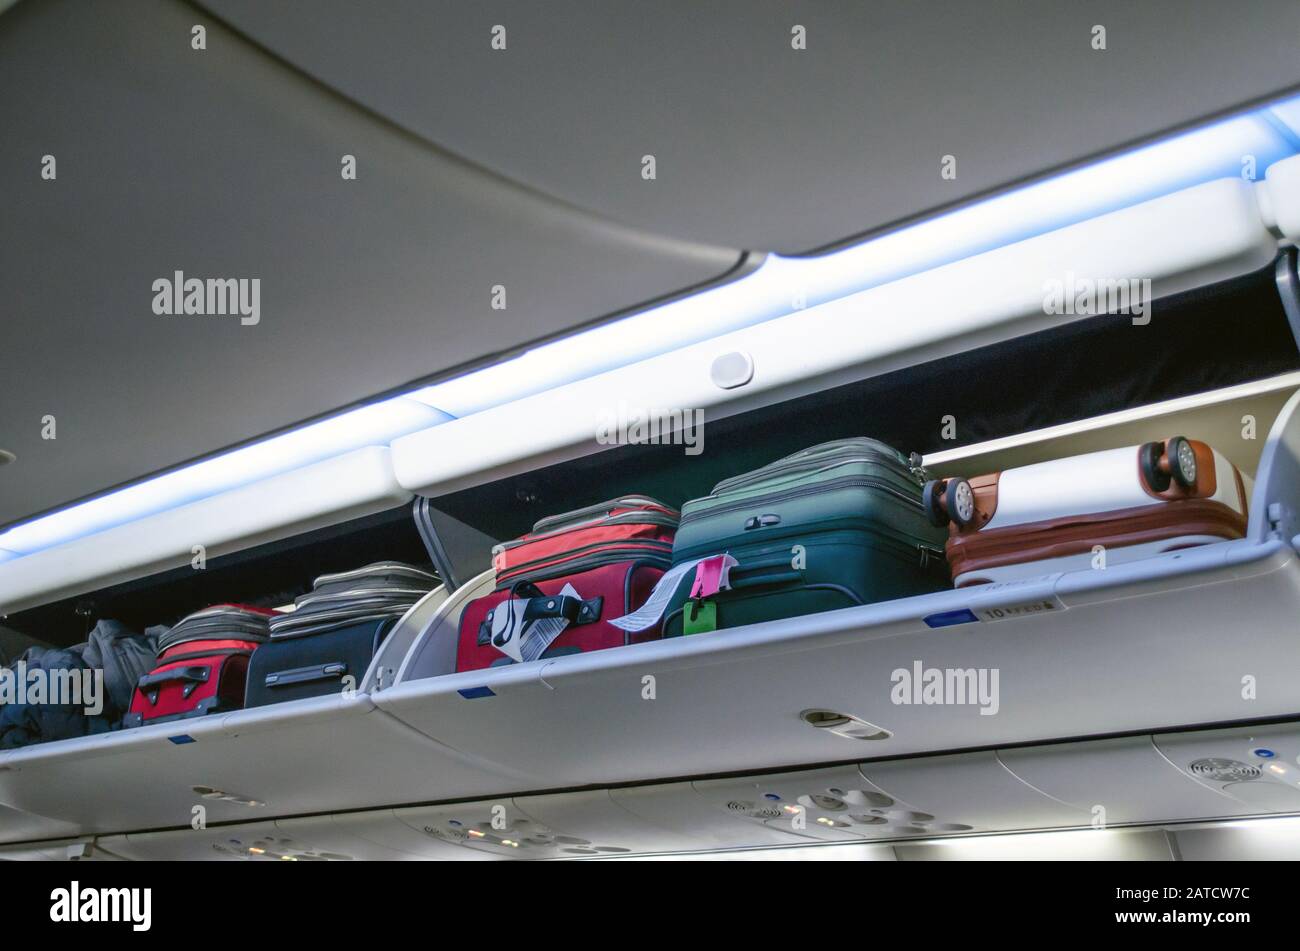 overhead bin on a airplane full of carry on bags and luggage Stock Photo